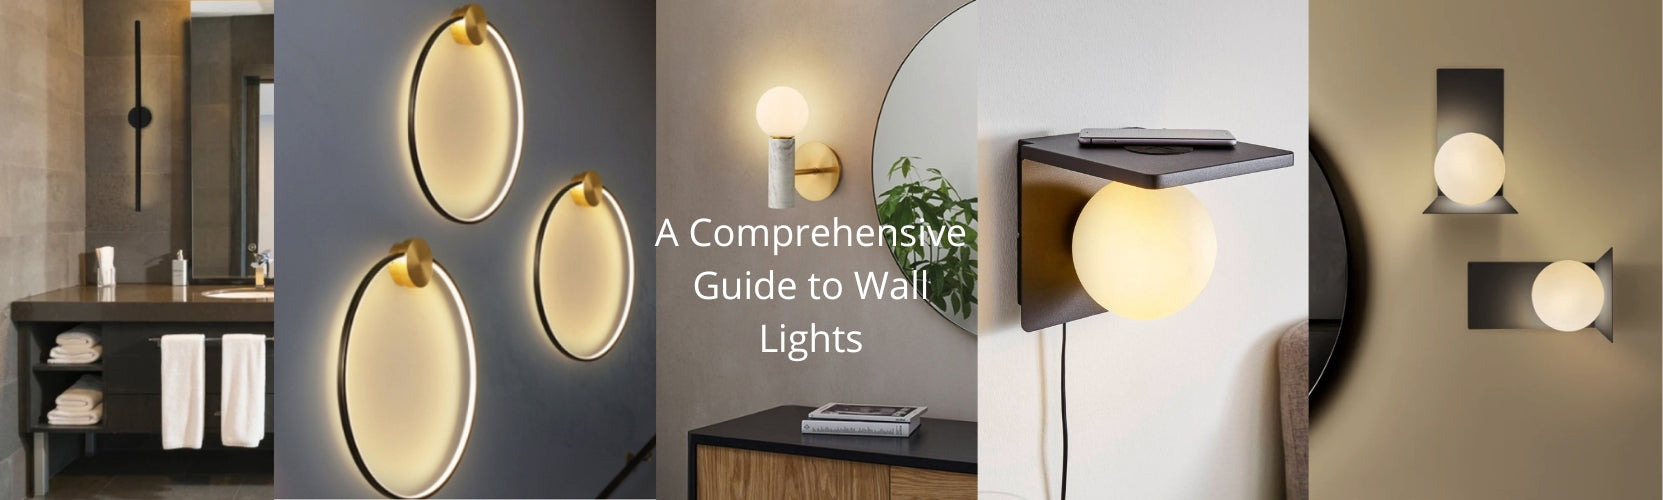 A Comprehensive Guide to Wall Lights